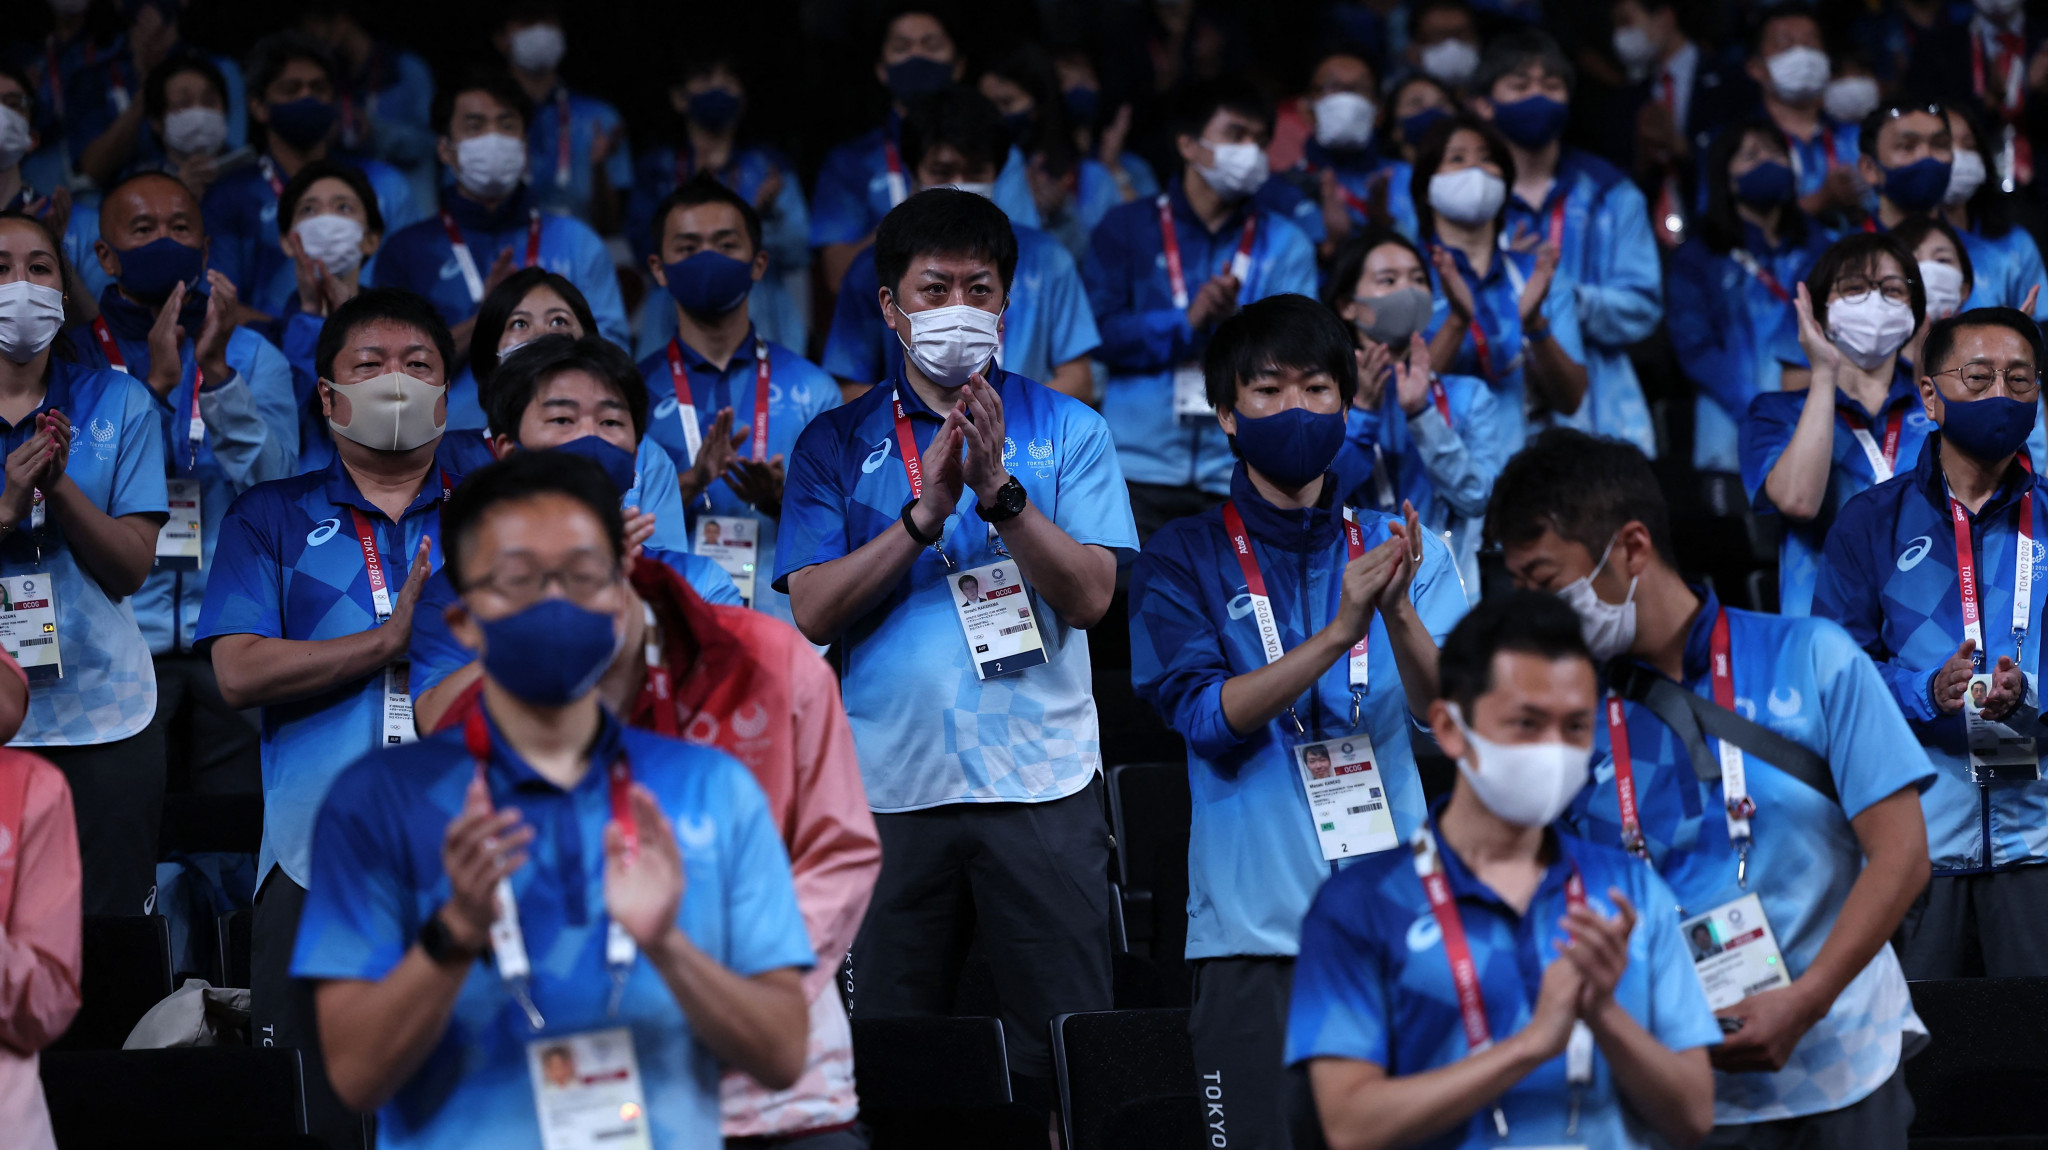 Paris 2024 has exceeded the 204,680 who applied for volunteer posts during Tokyo 2020 ©Getty Images